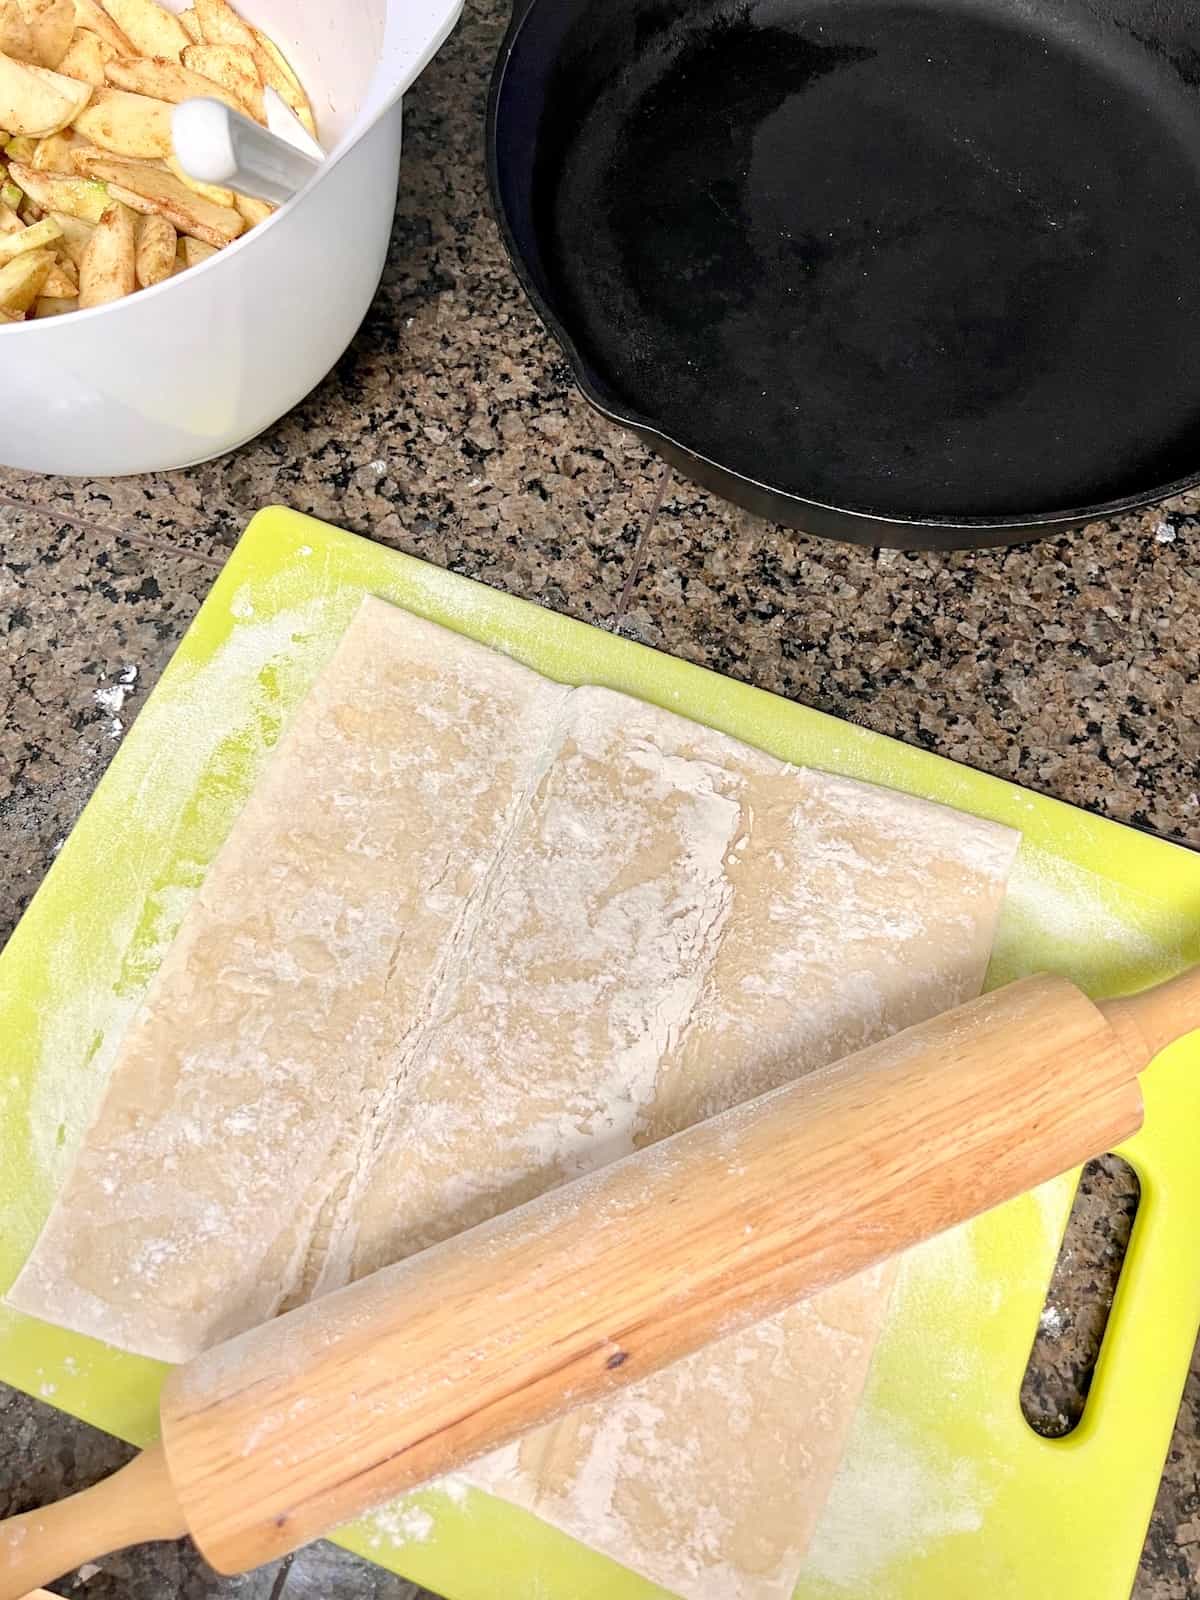 Unfolded puff pastry on a cutting board with a rolling pin.